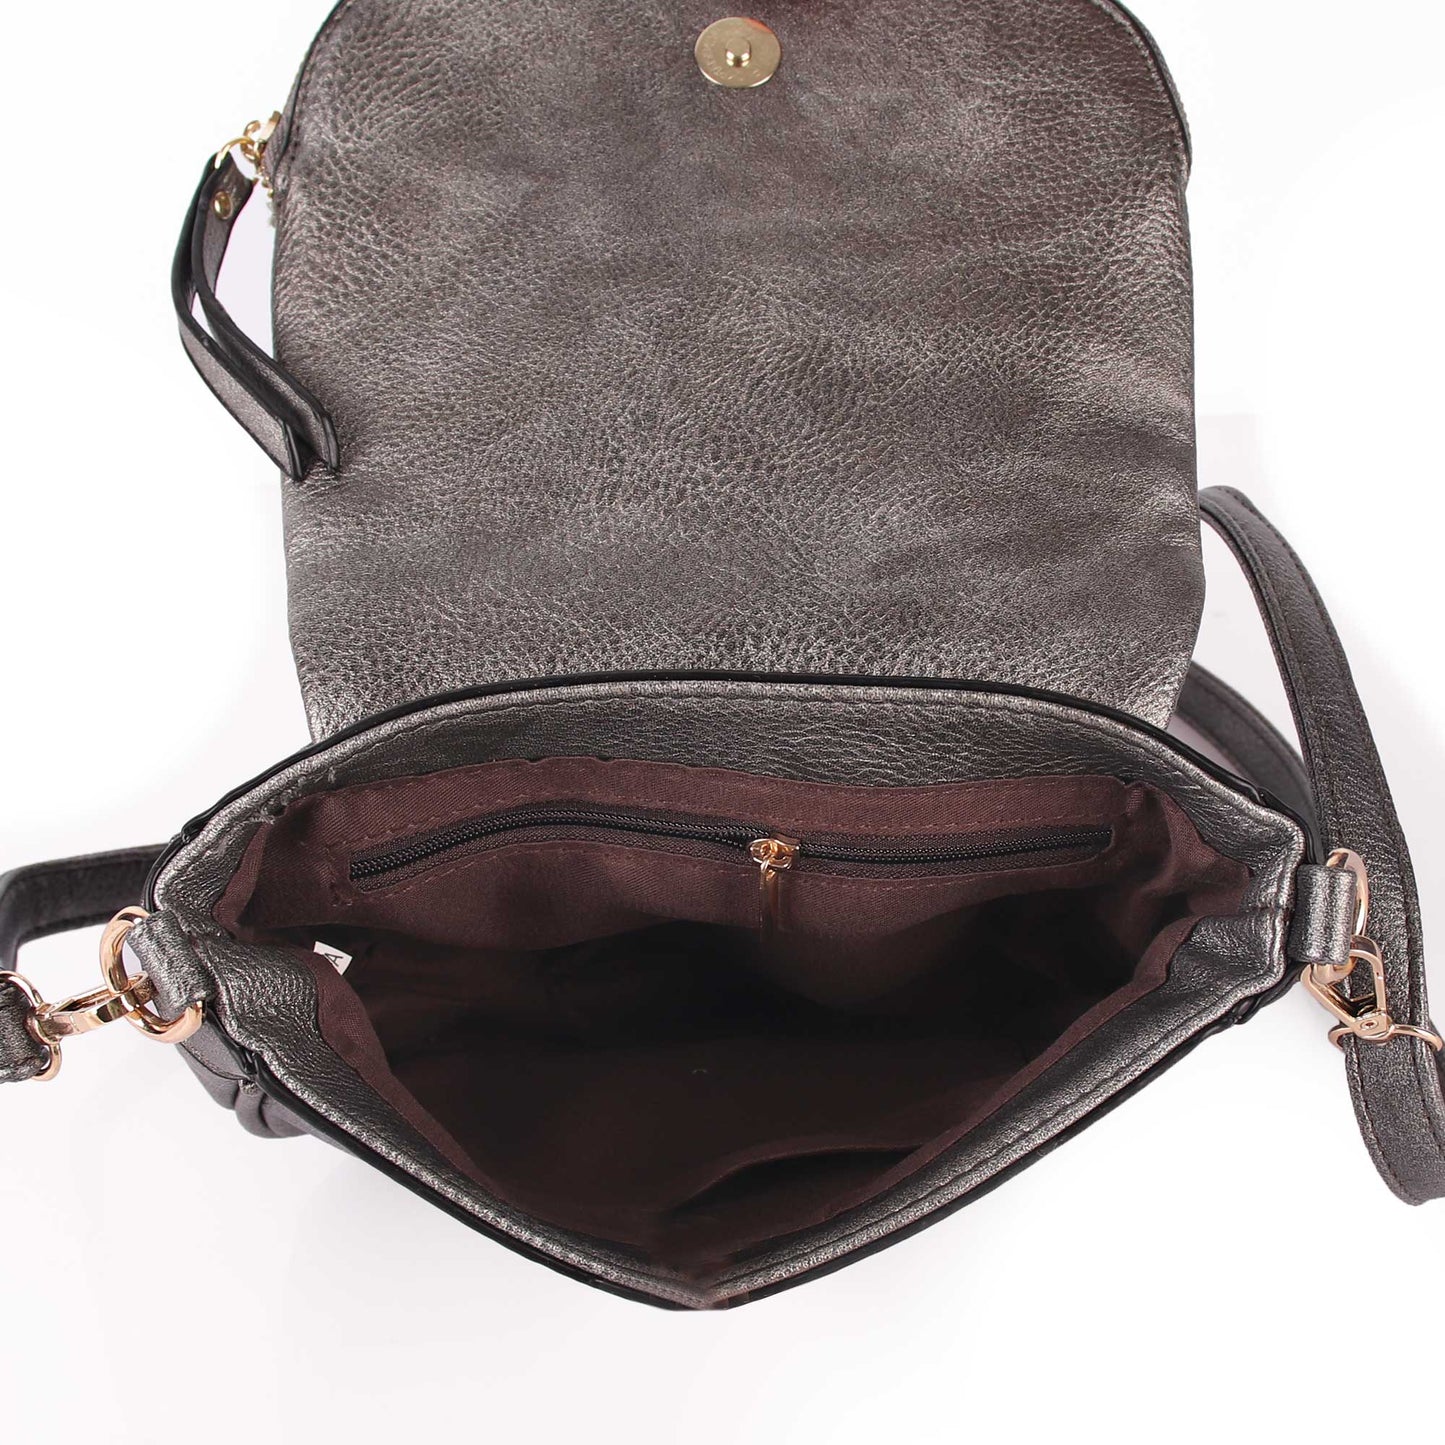 The Classic conventional Stylish Grey Sling Bag